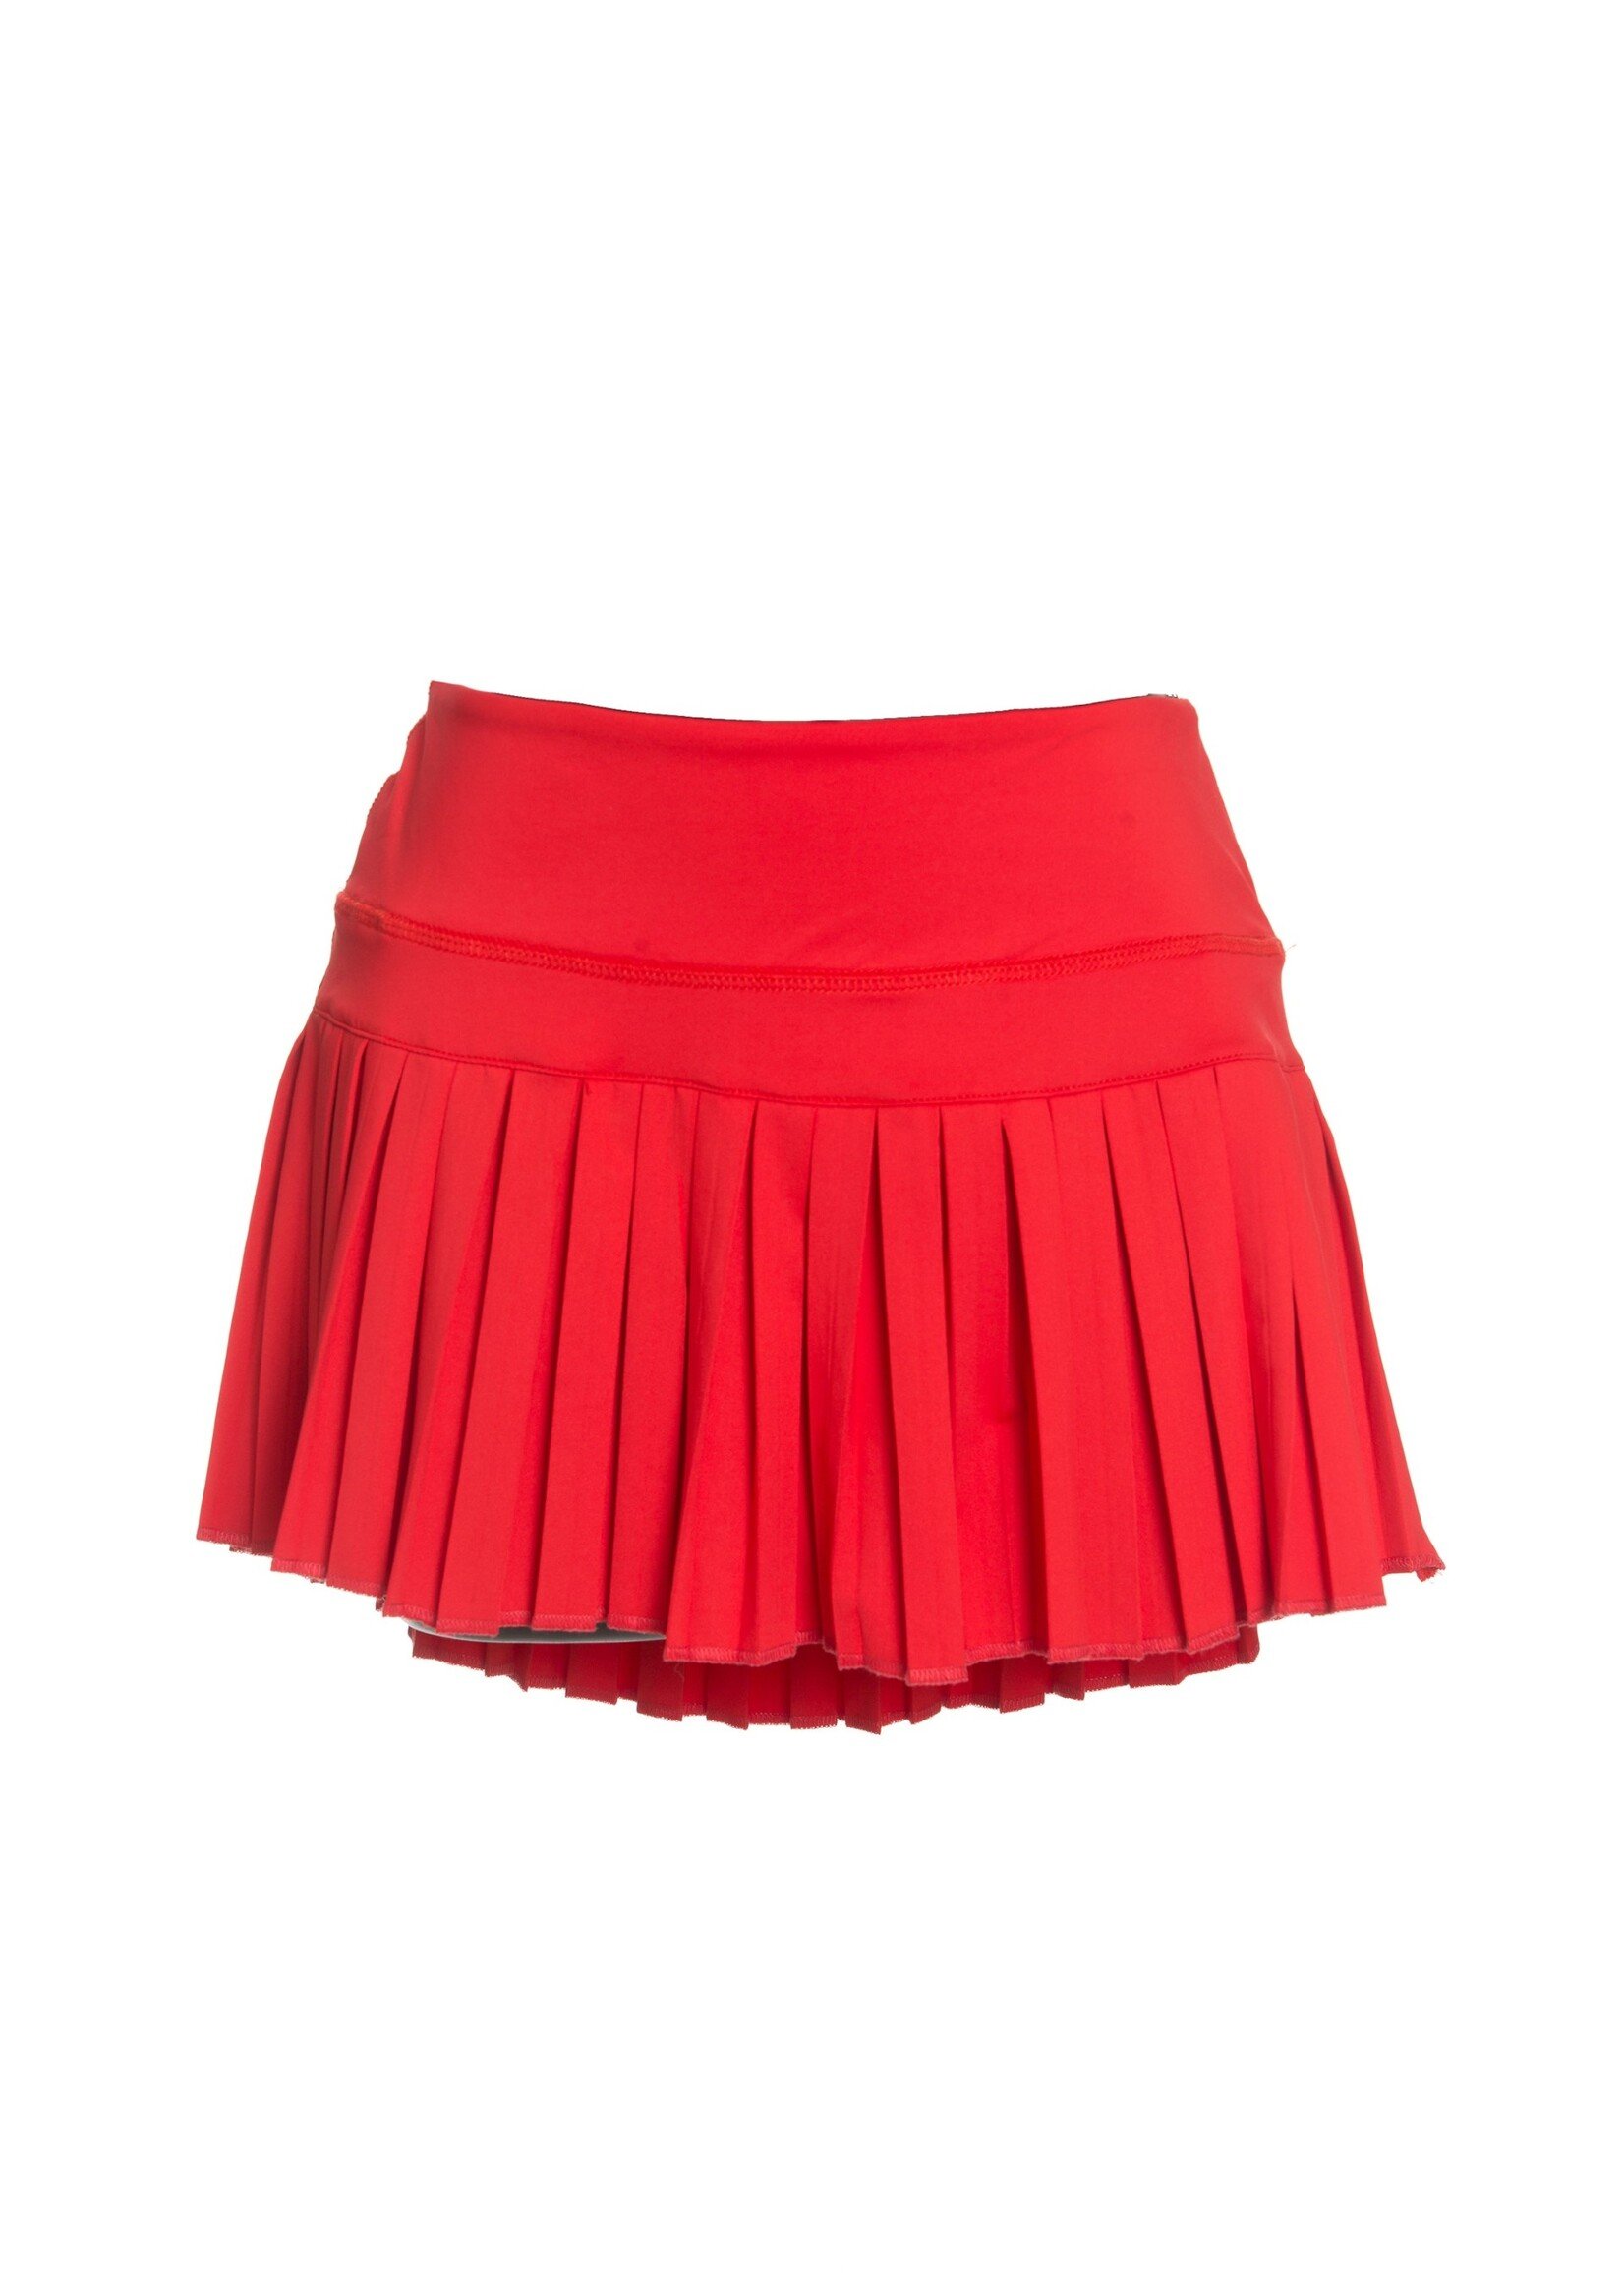 Gold Hinge Gold Hinge Candy Red Pleated Skirt